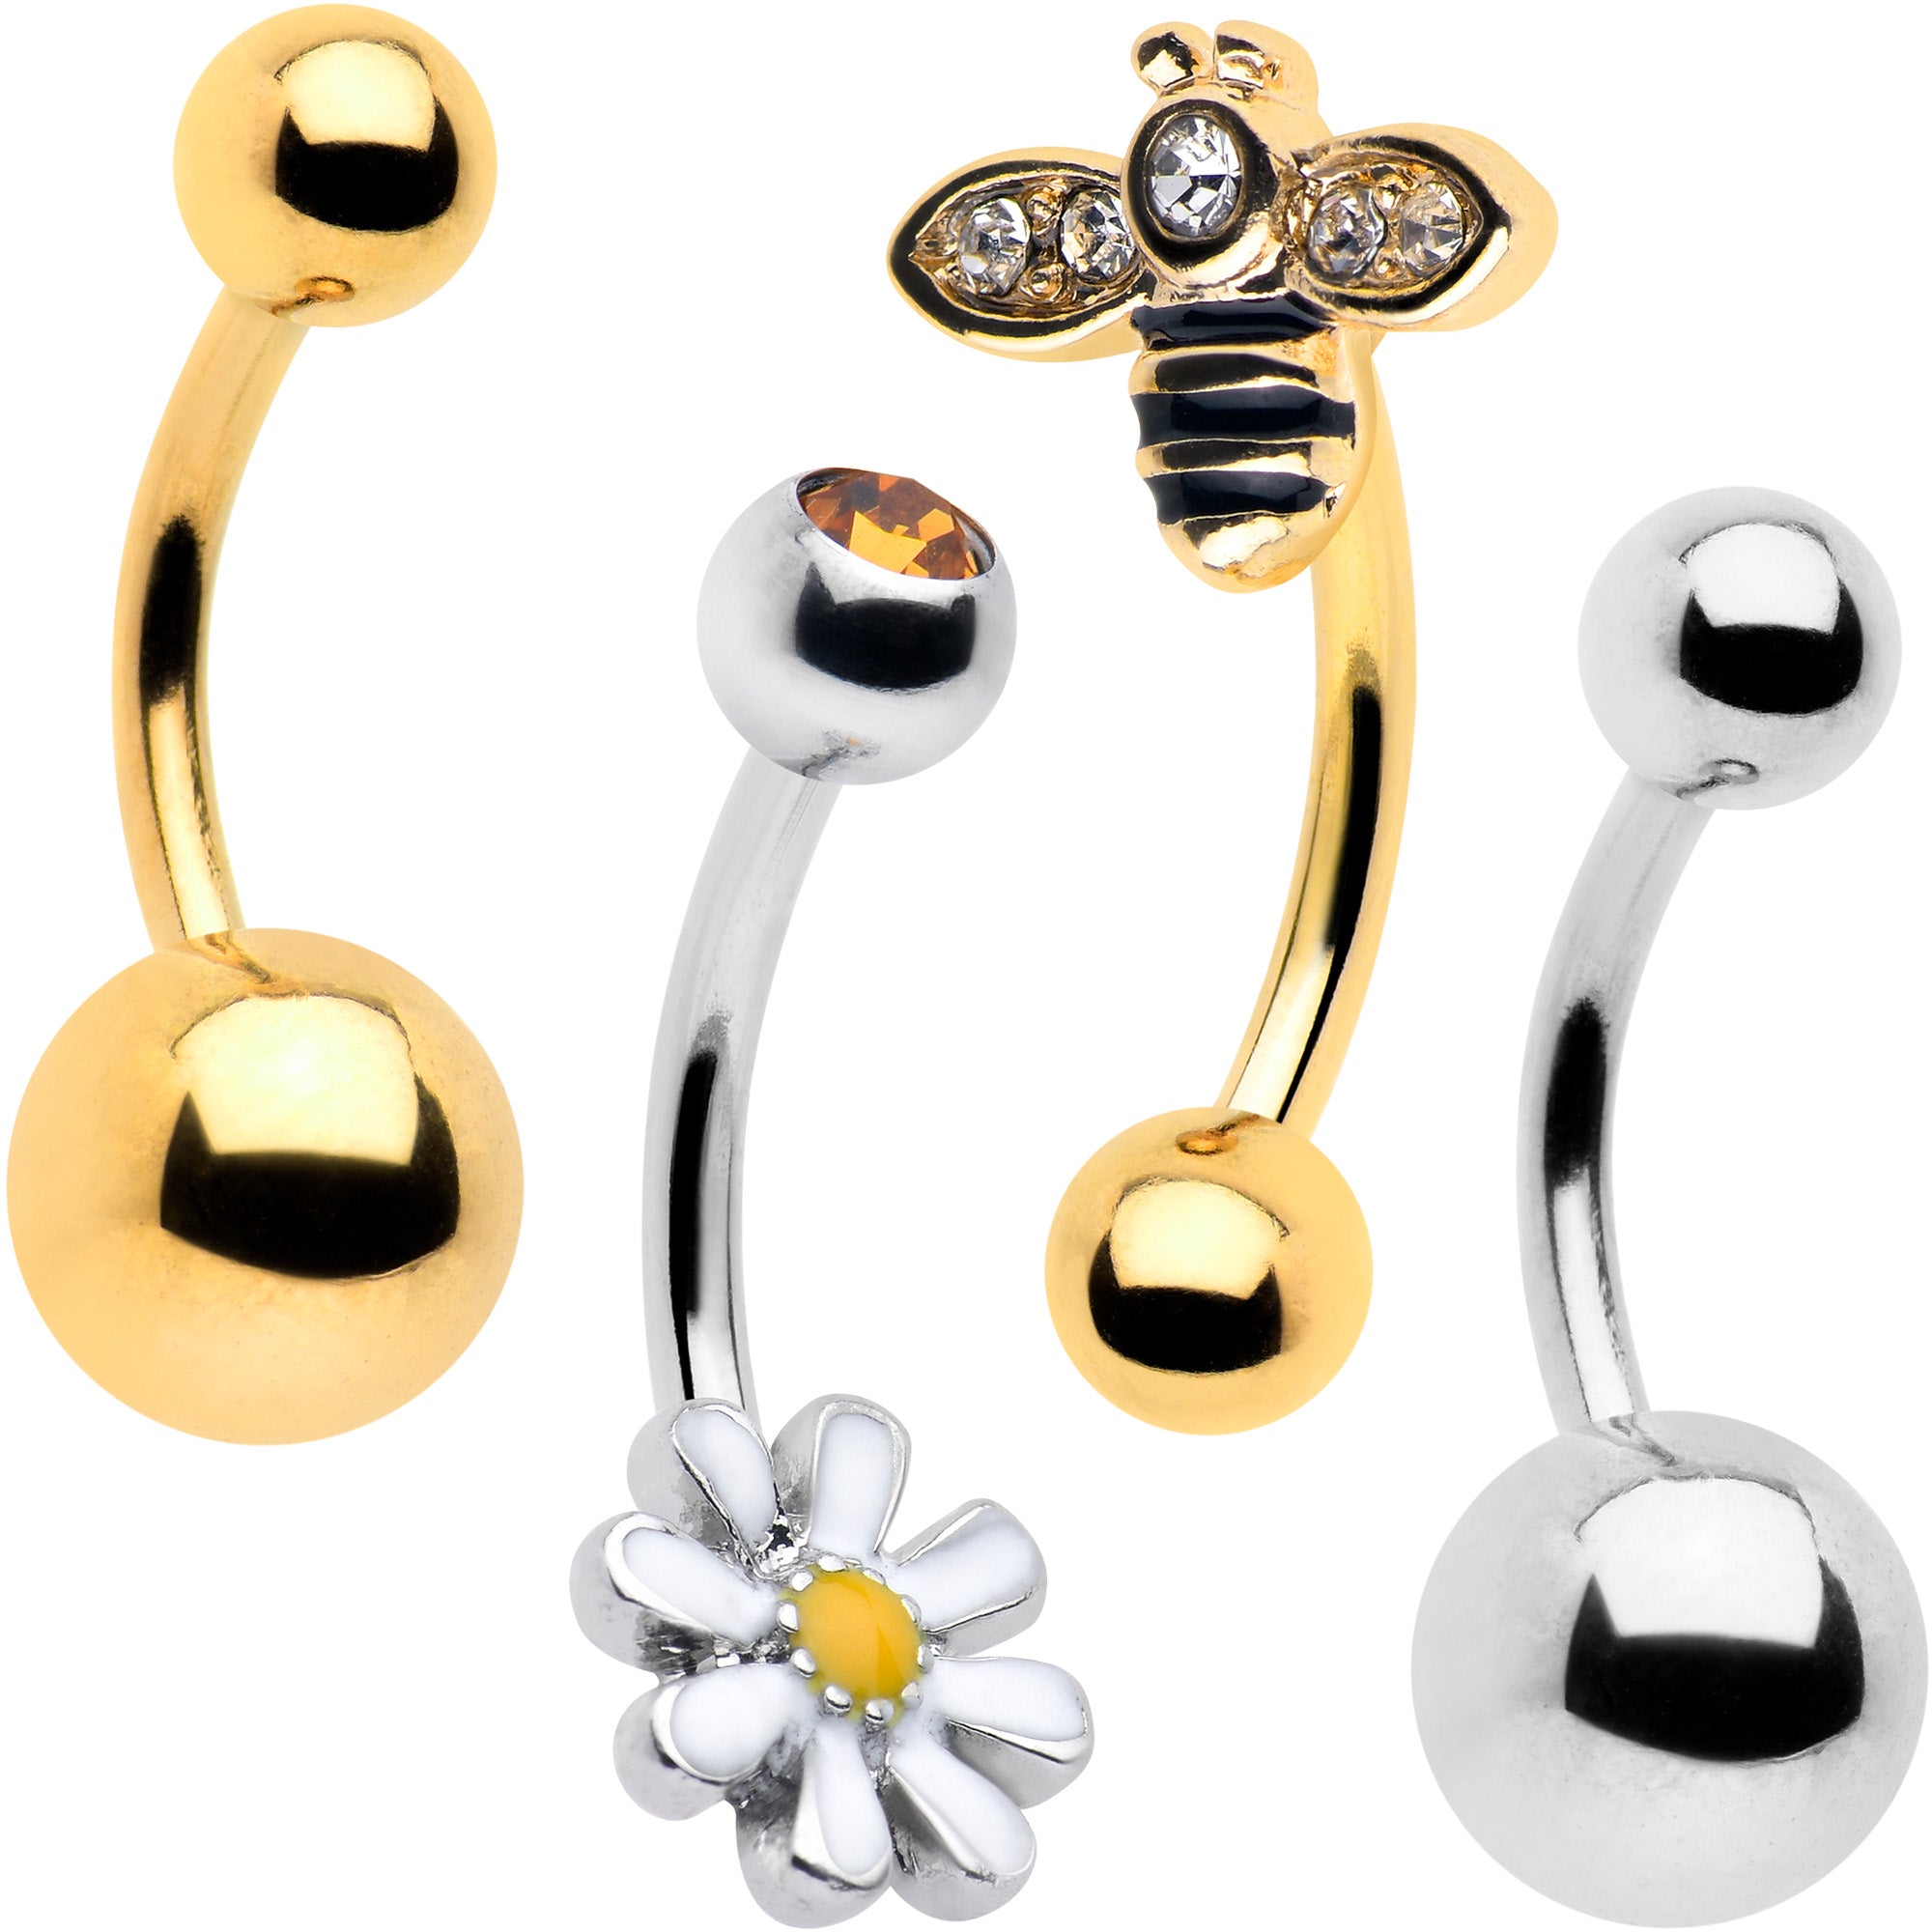 Clear Yellow Gem Gold Tone Bee Flower Belly Ring Set of 4